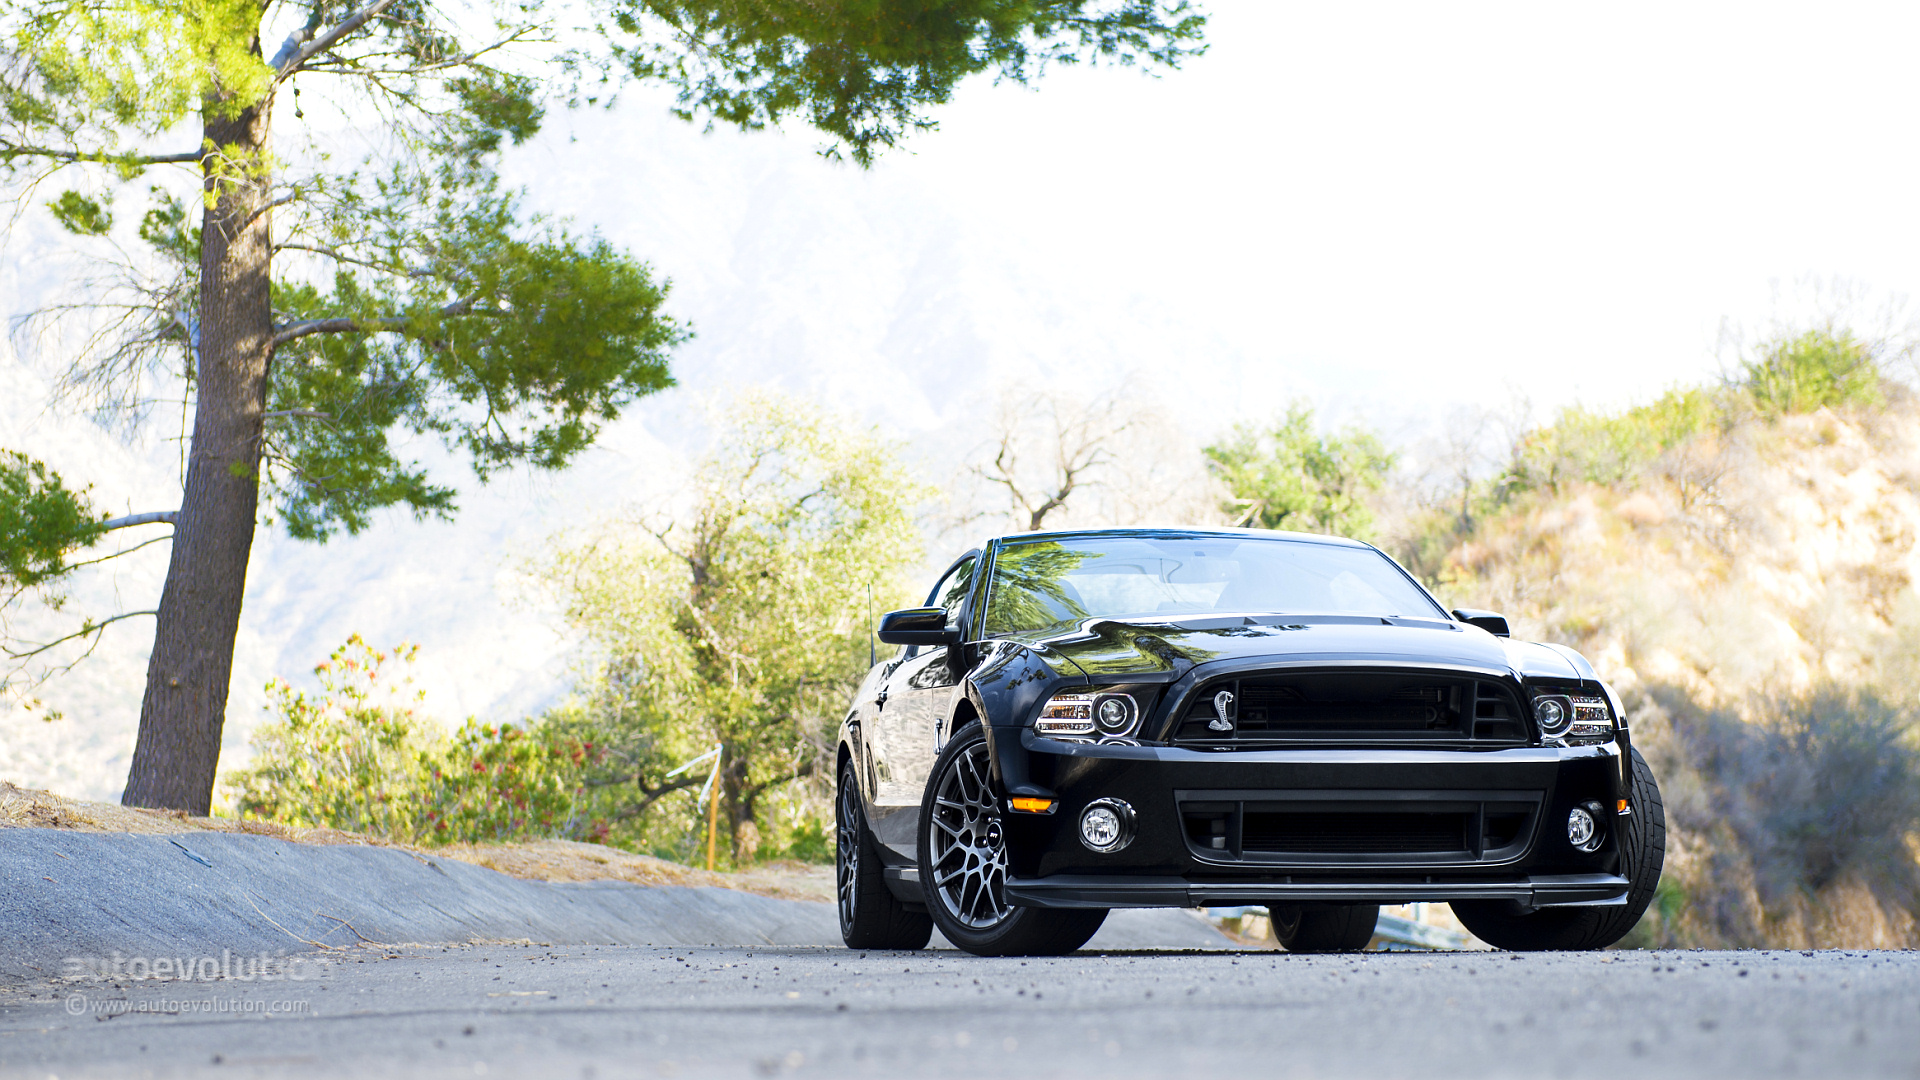 Ford Mustang Shelby Cobra Gt 500 Wallpapers